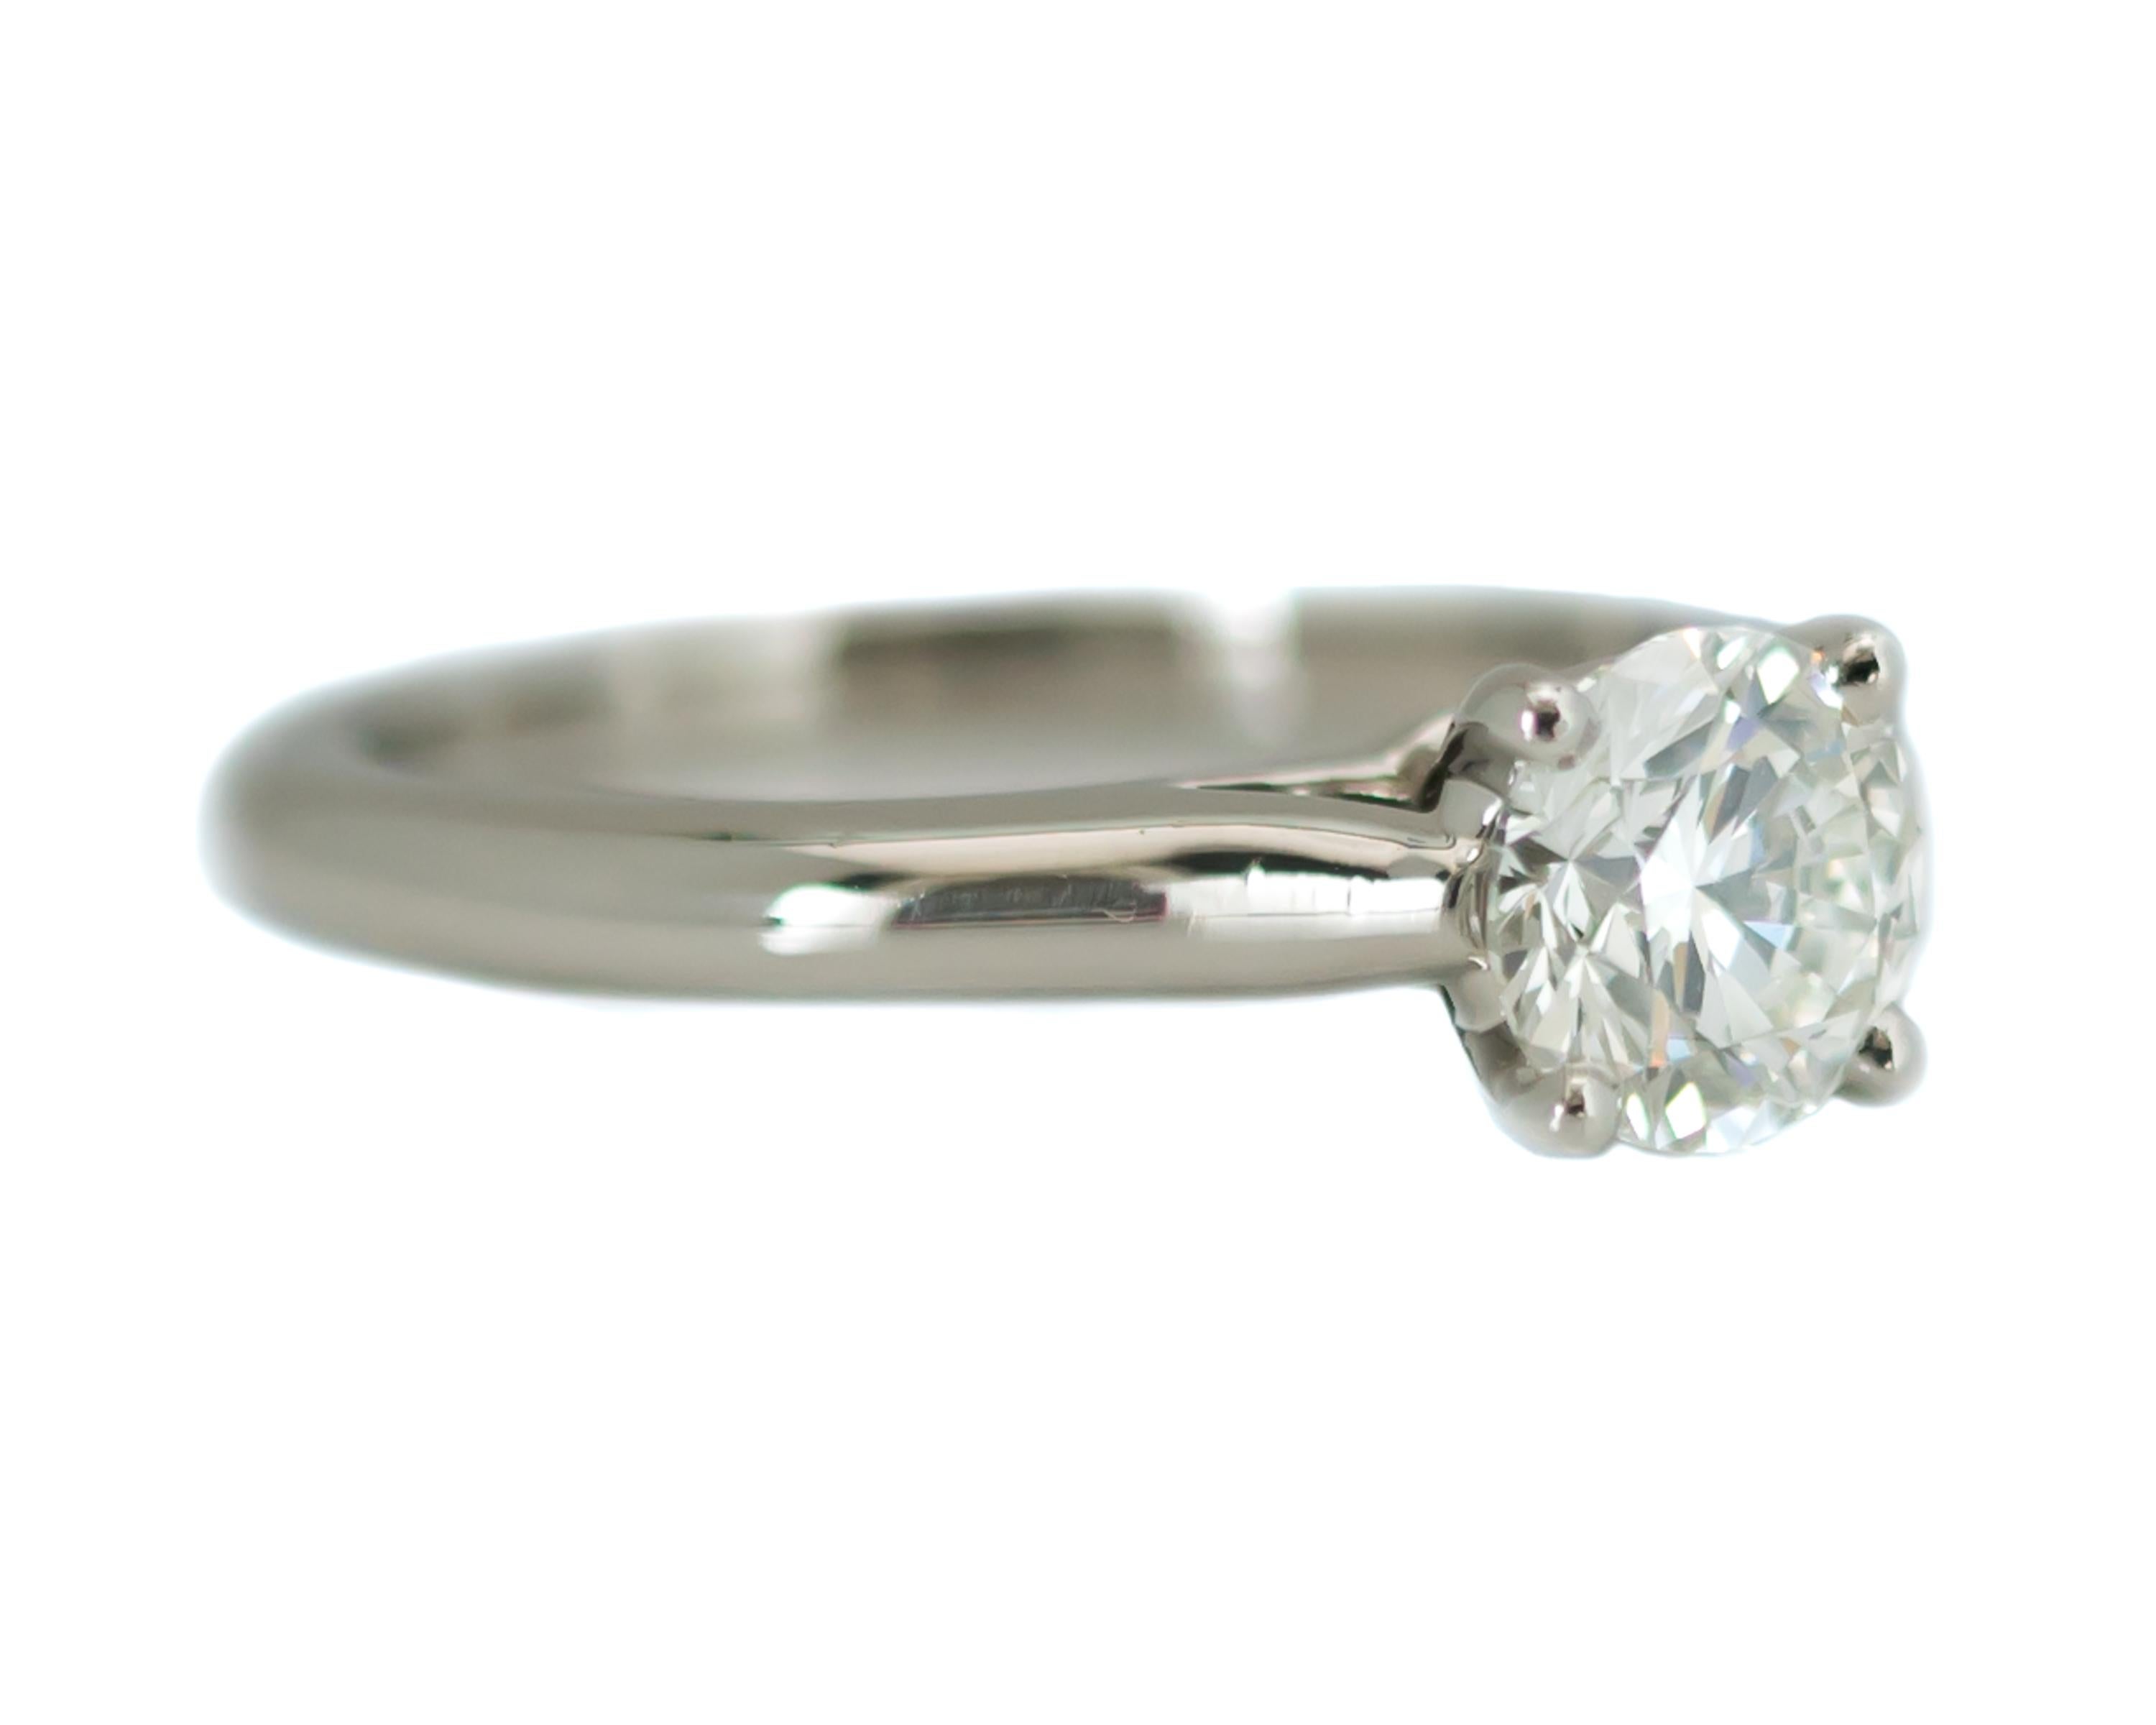 Cartier Platinum & Diamond Solitaire Engagement Ring

0.93 carat Round Brilliant Diamond Solitaire
Platinum Setting
Cartier Size 52
U.S. Size 6
Shank is 2.0 millimeters wide

*see our other listings for the Matching Cartier Platinum Wedding Band -